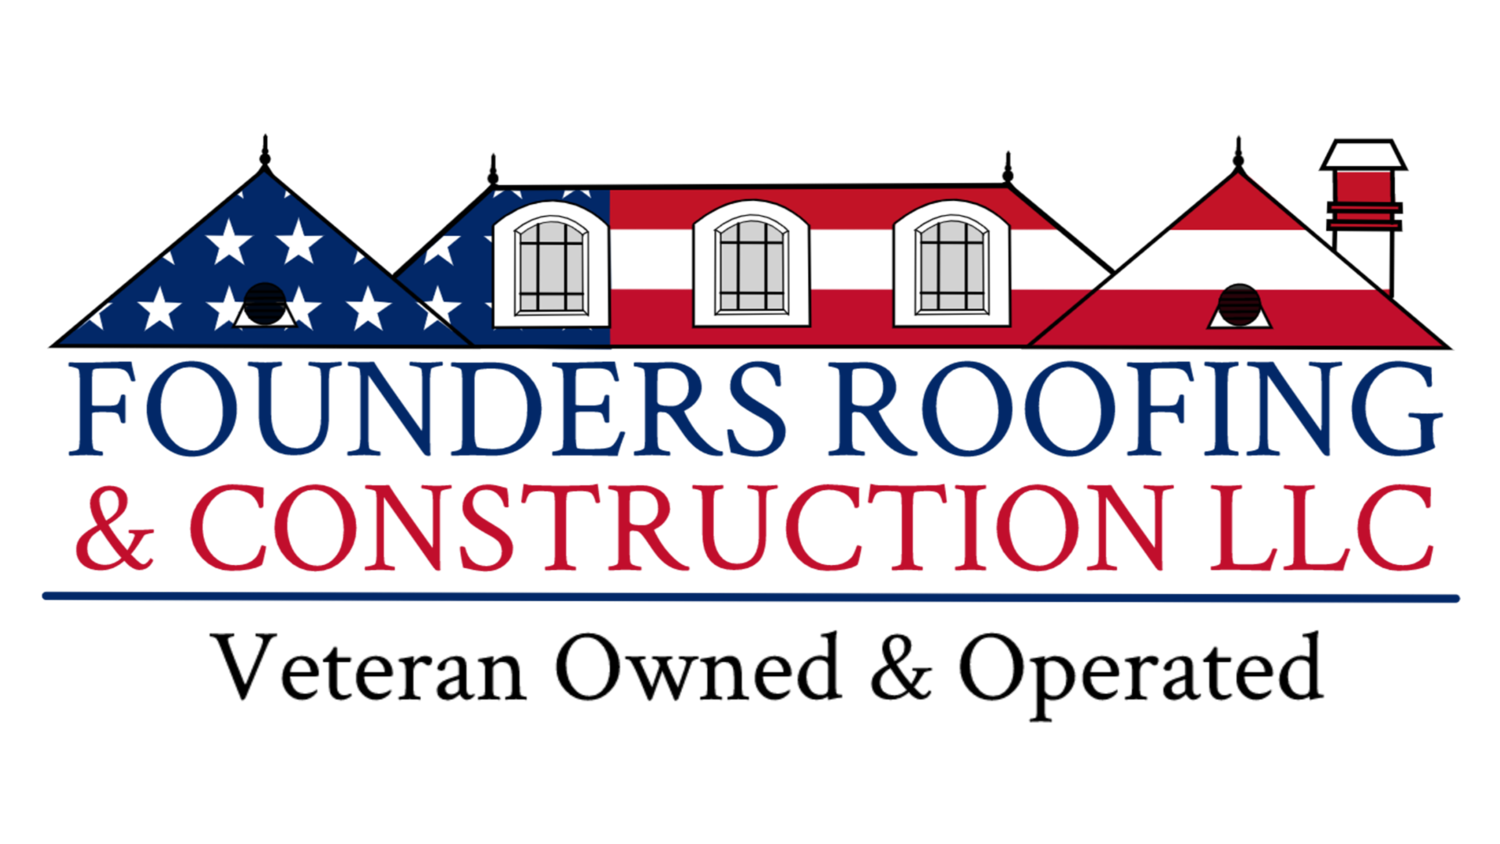 Founders Roofing & Construction LLC